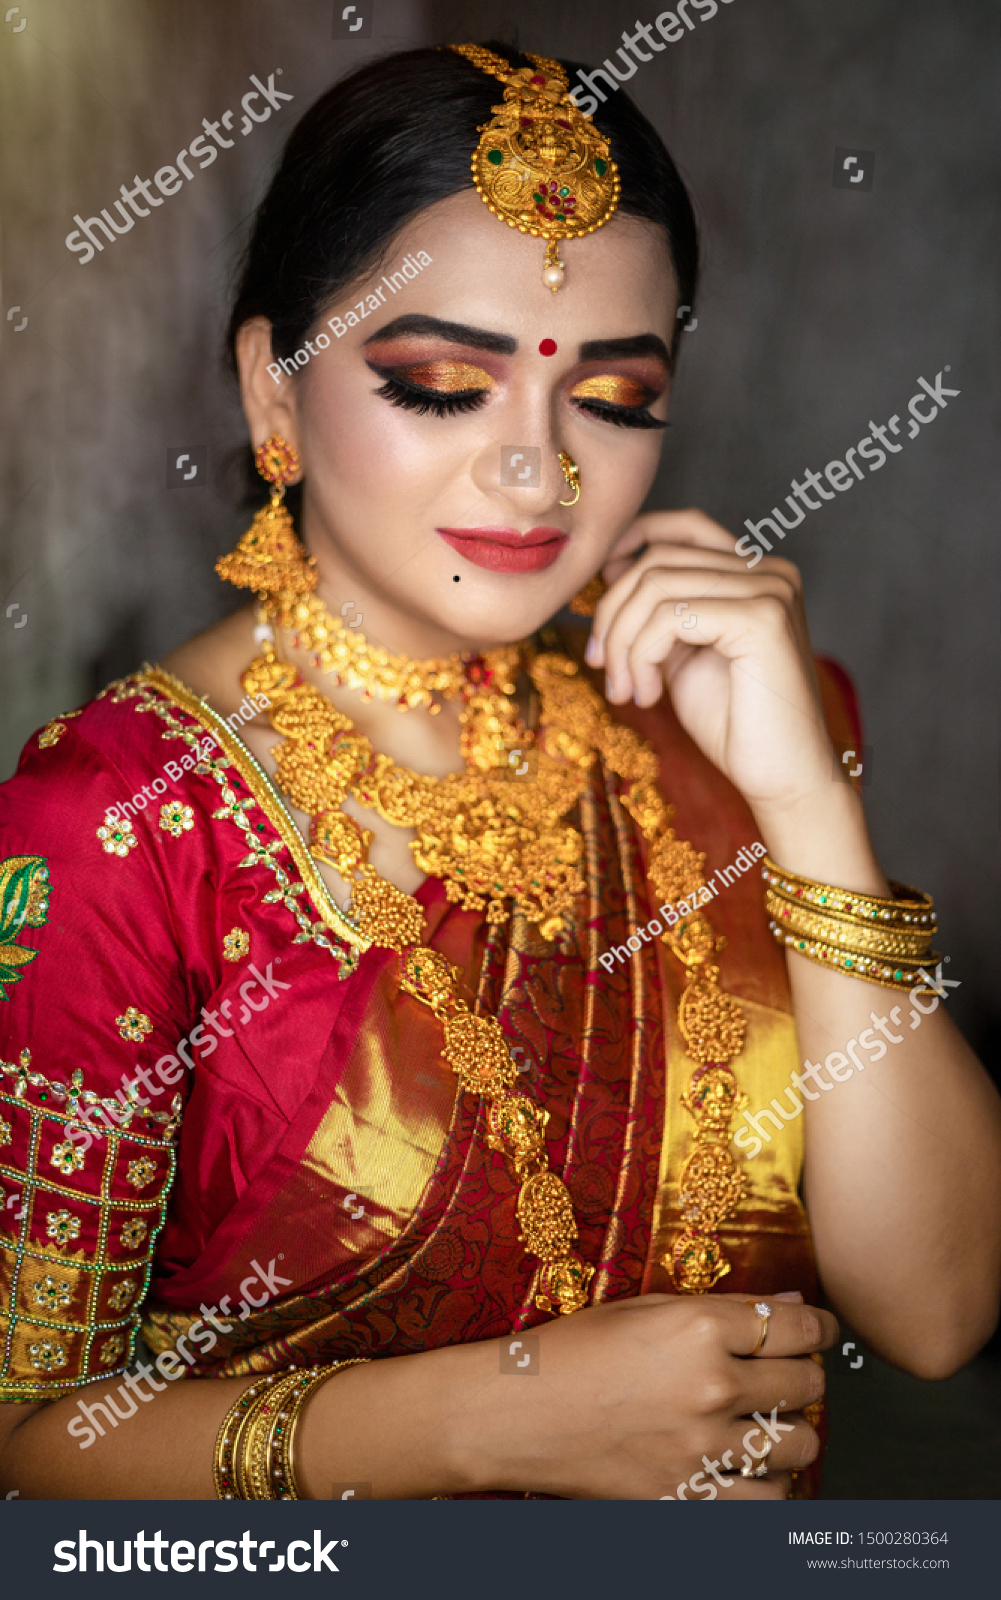 Indian Bride Wearing Heavy Gold Jewelry 